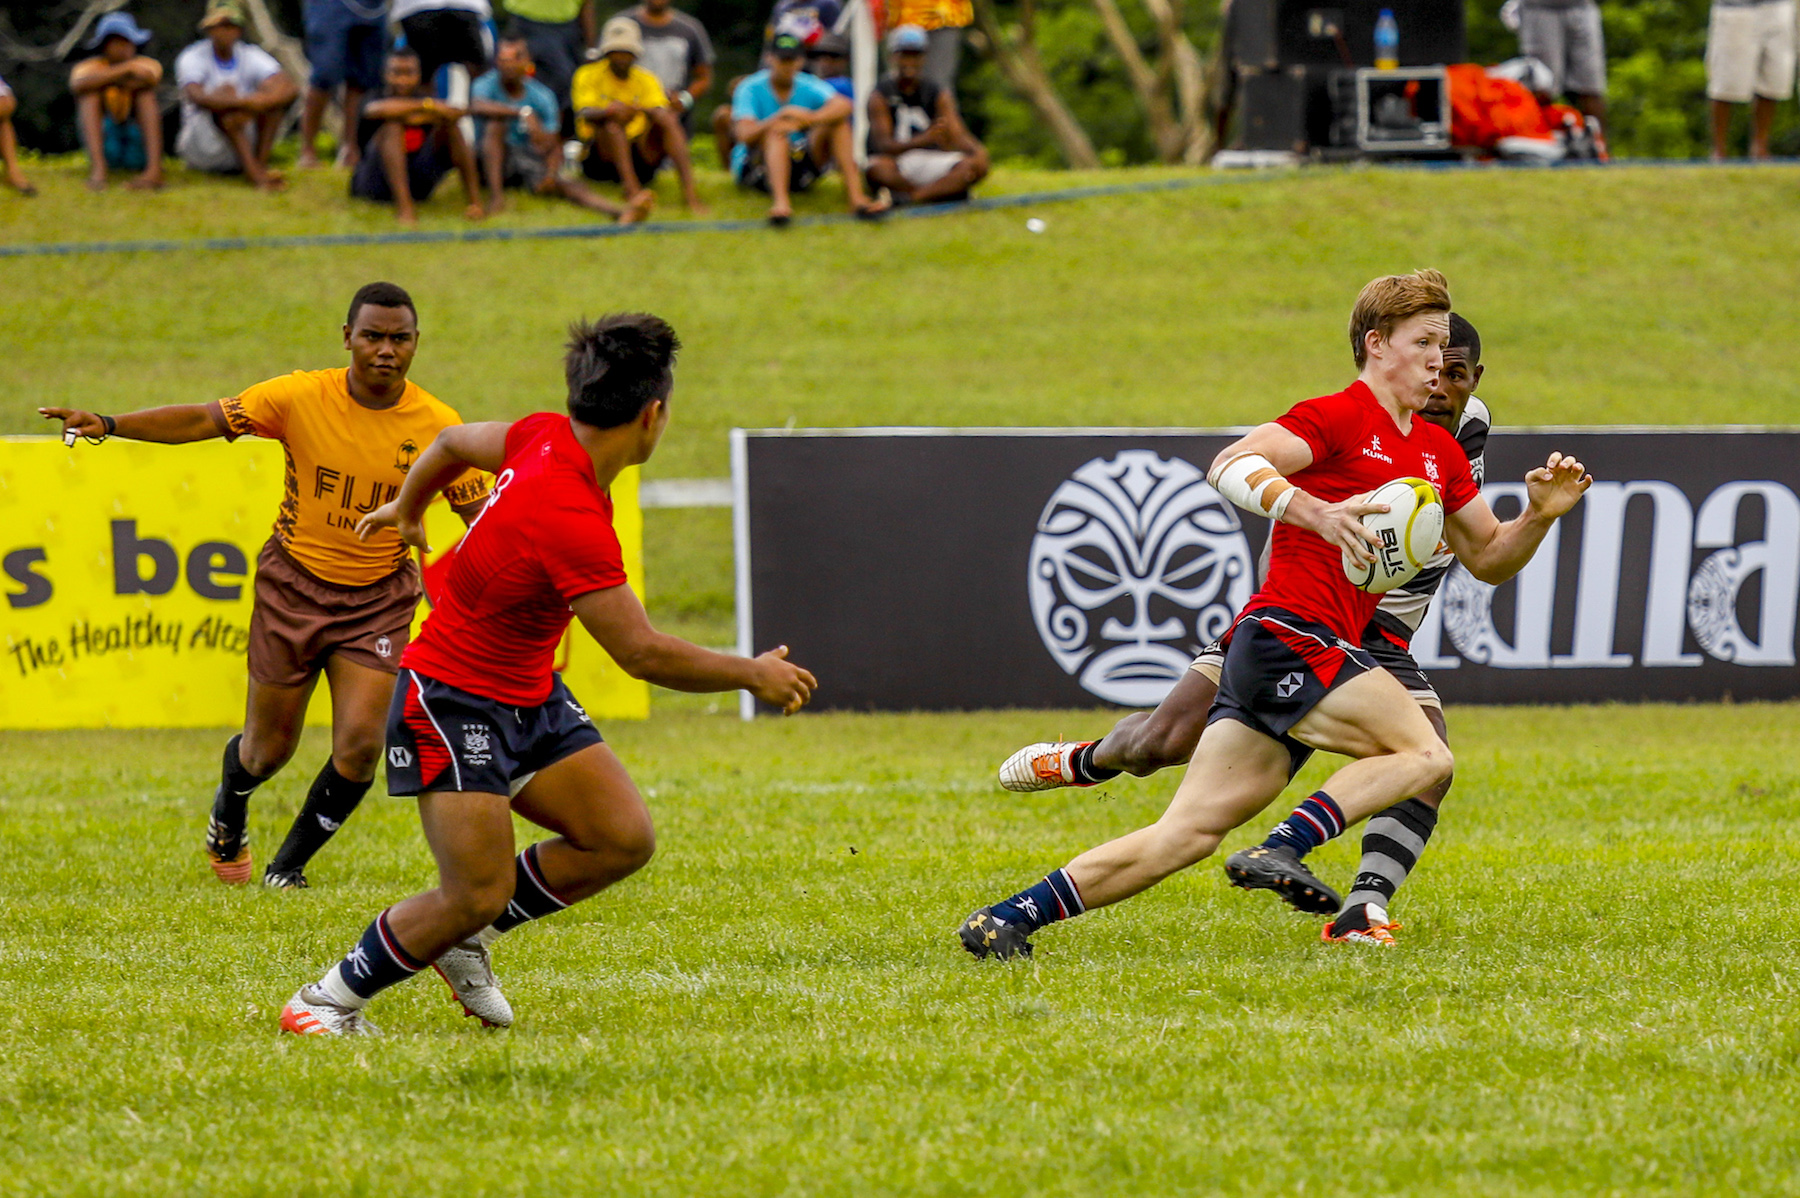 Wing Marcus Ramage notched 5 tries on day one of the Coral Coast Sevens